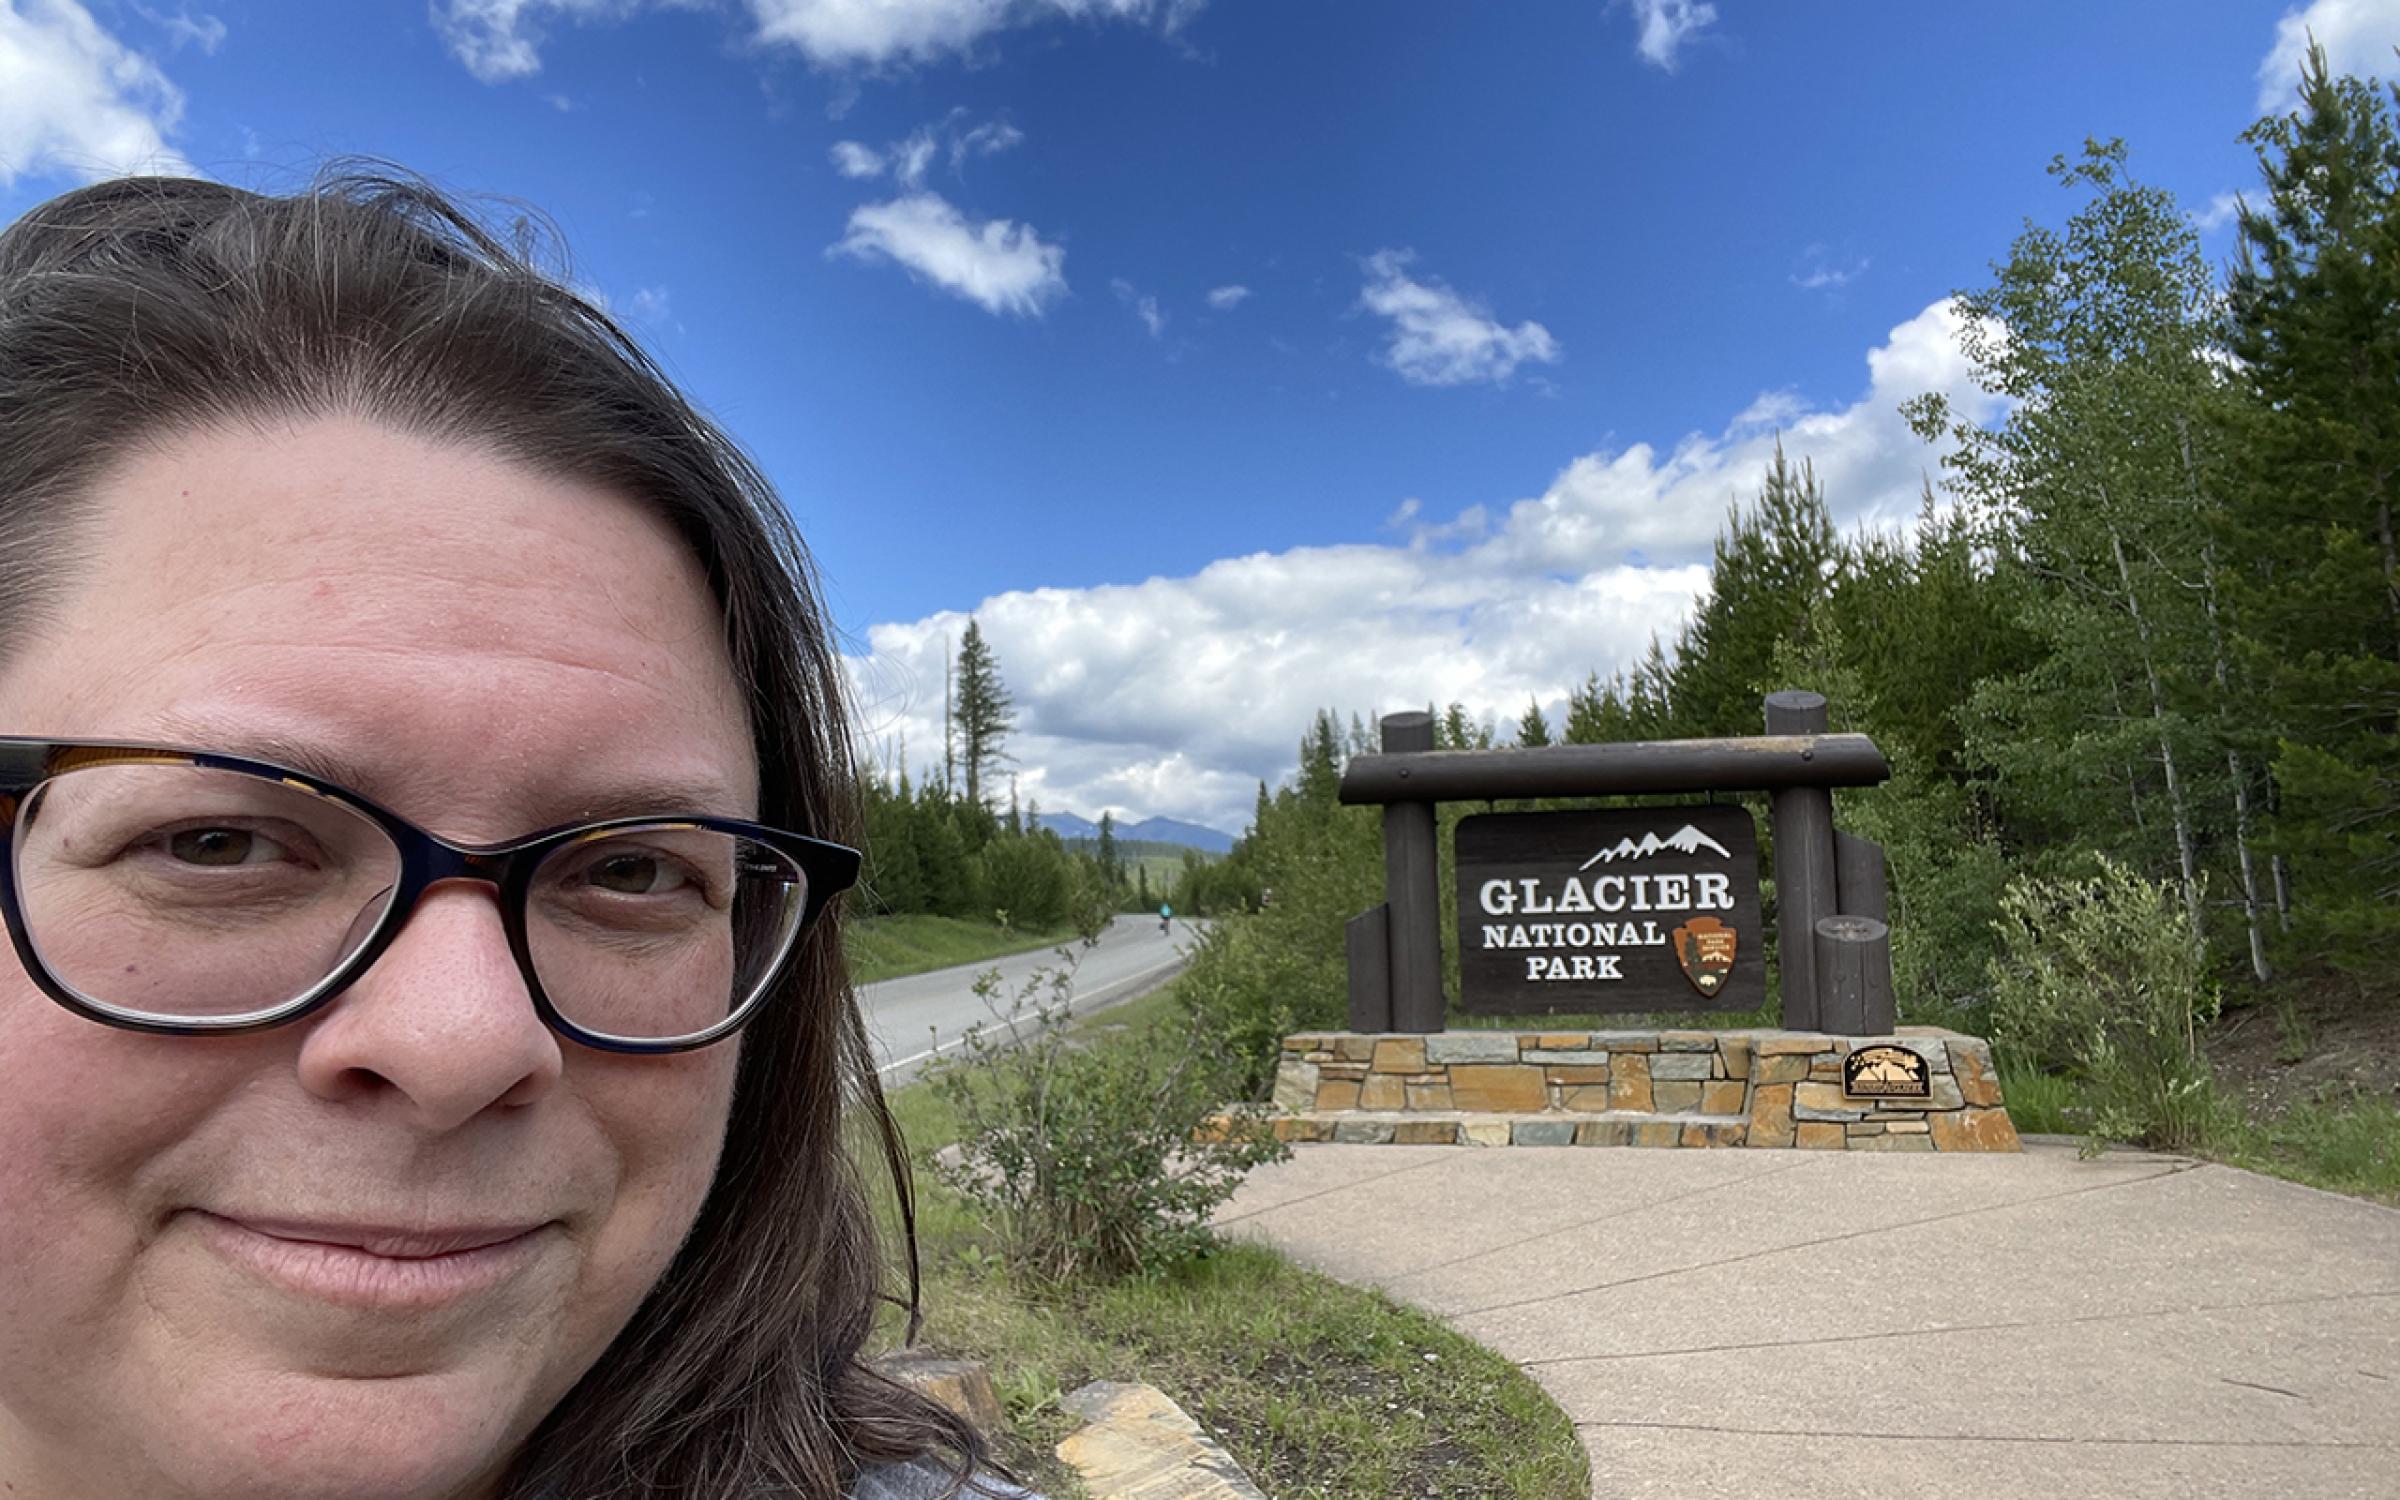 A woman with brown hair and black glasses taking a selfie in front of a national park sign and green grass.